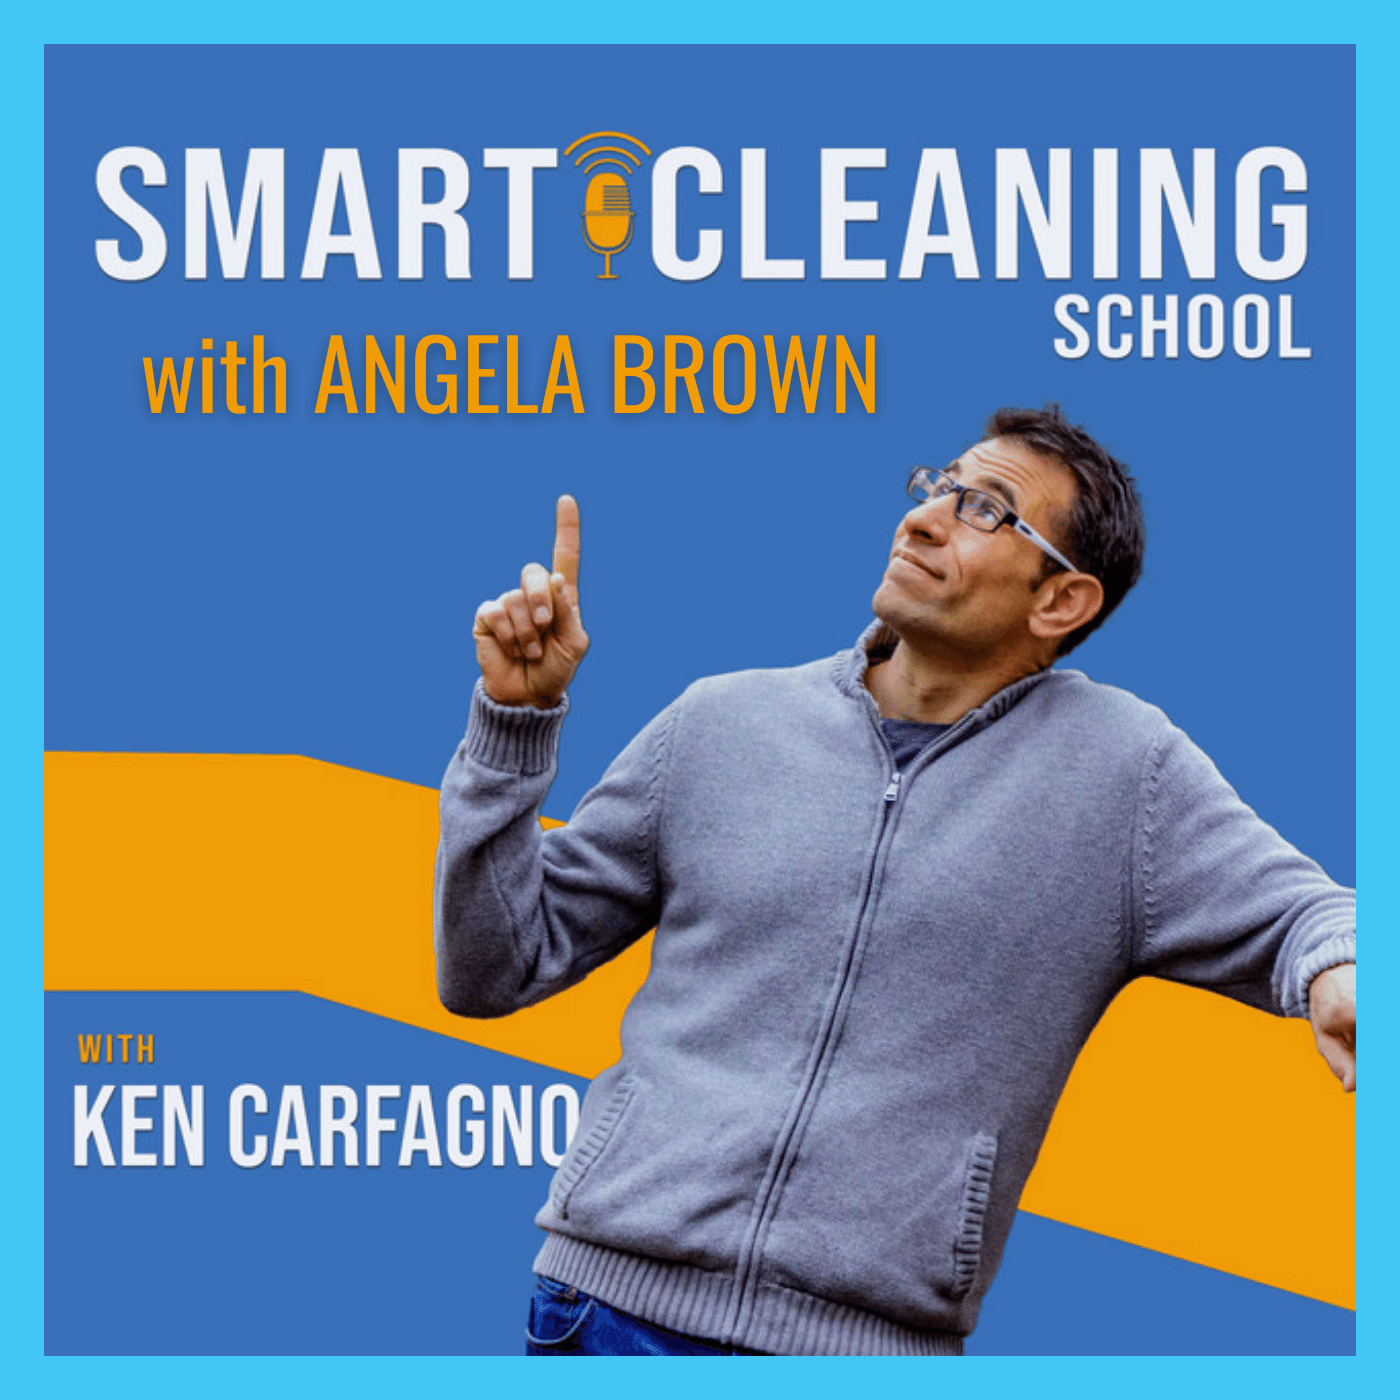 Ken Carfagno interviews Angela Brown on Smart Cleaning School Podcast